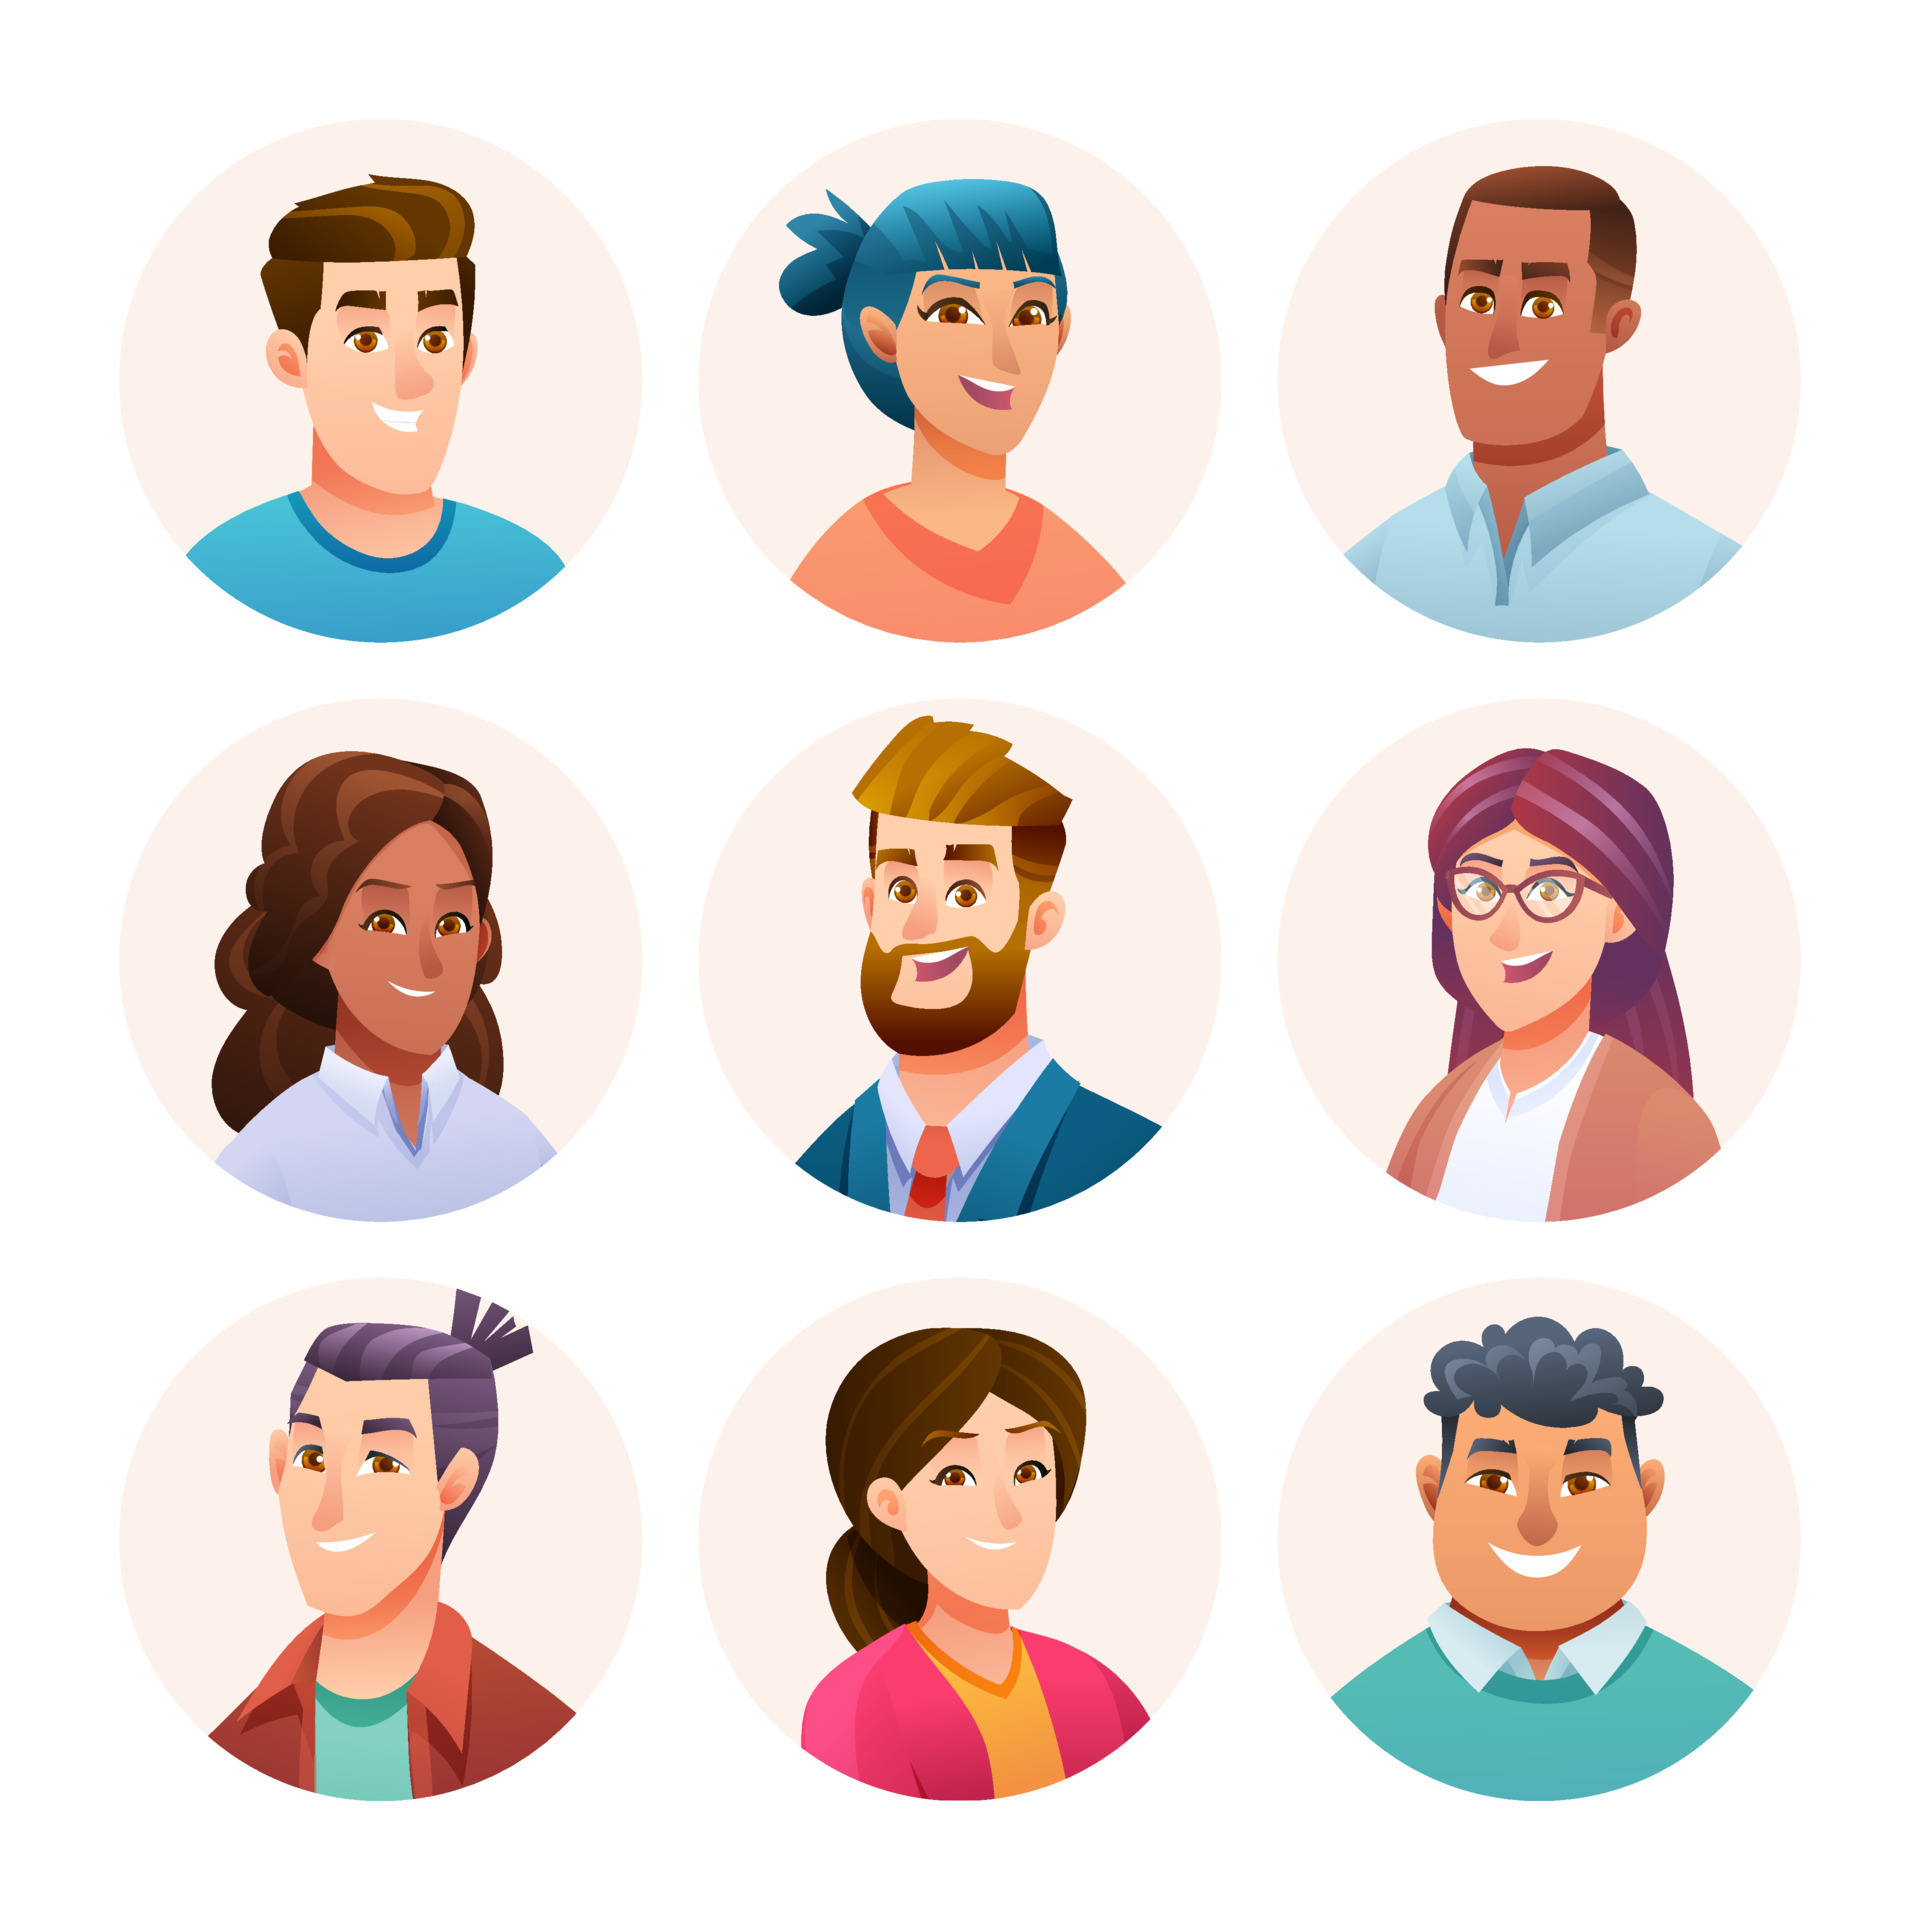 People Avatars Vector Art Icons and Graphics for Free Download